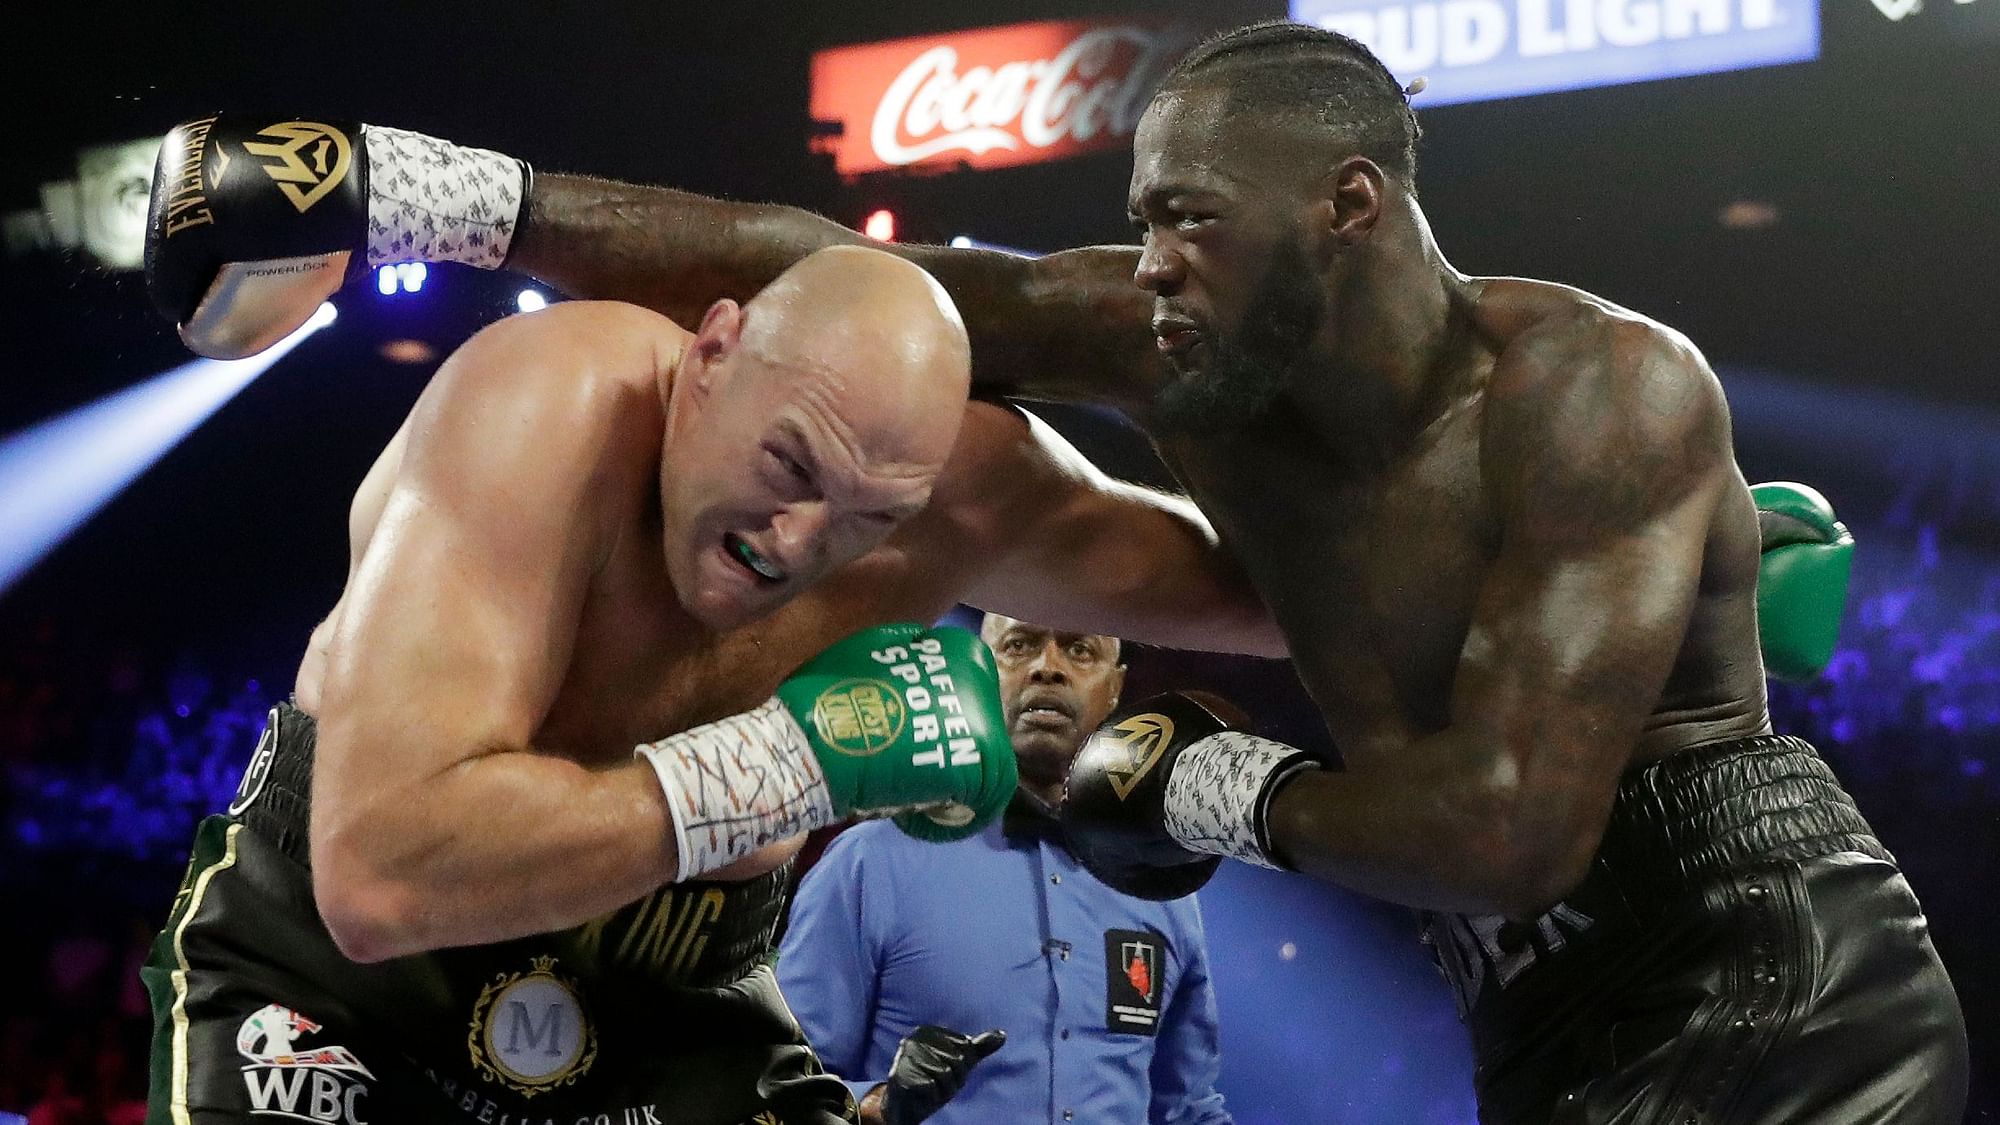 It was the first loss for Wilder (right) in 44 fights, and it came in the 11th defense of the title he won in 2015.